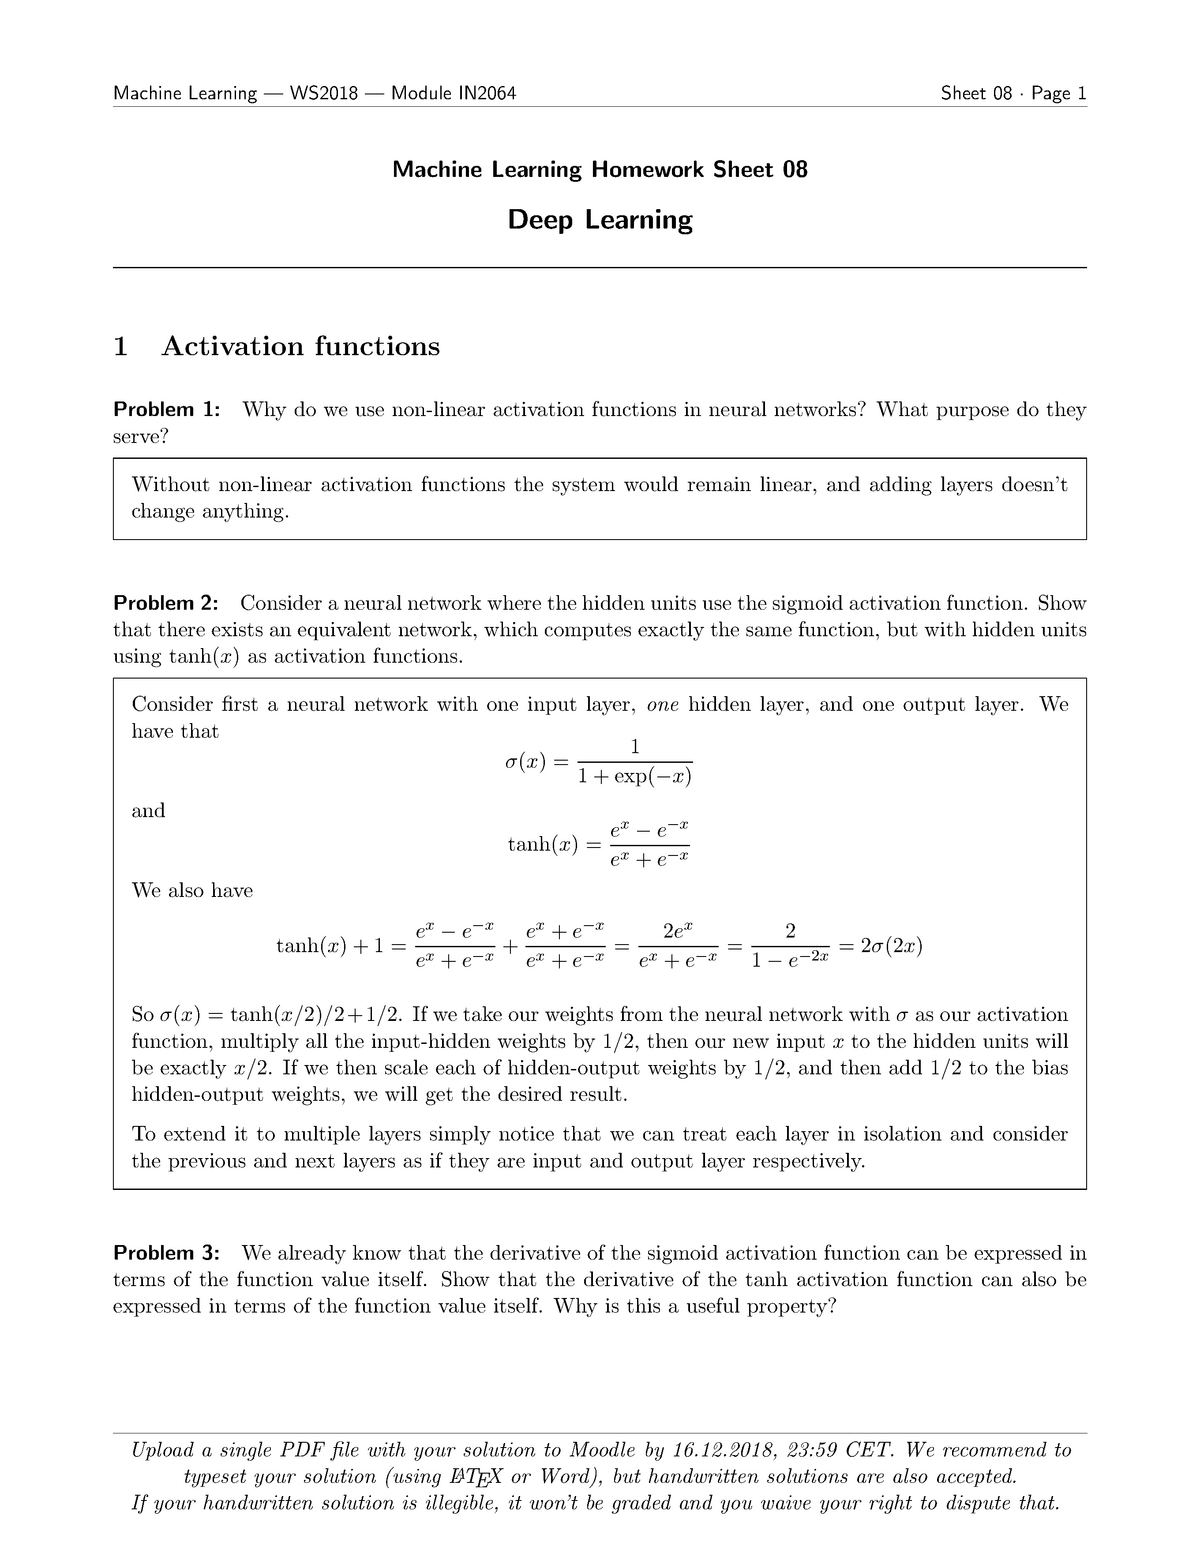 machine learning homework assignments